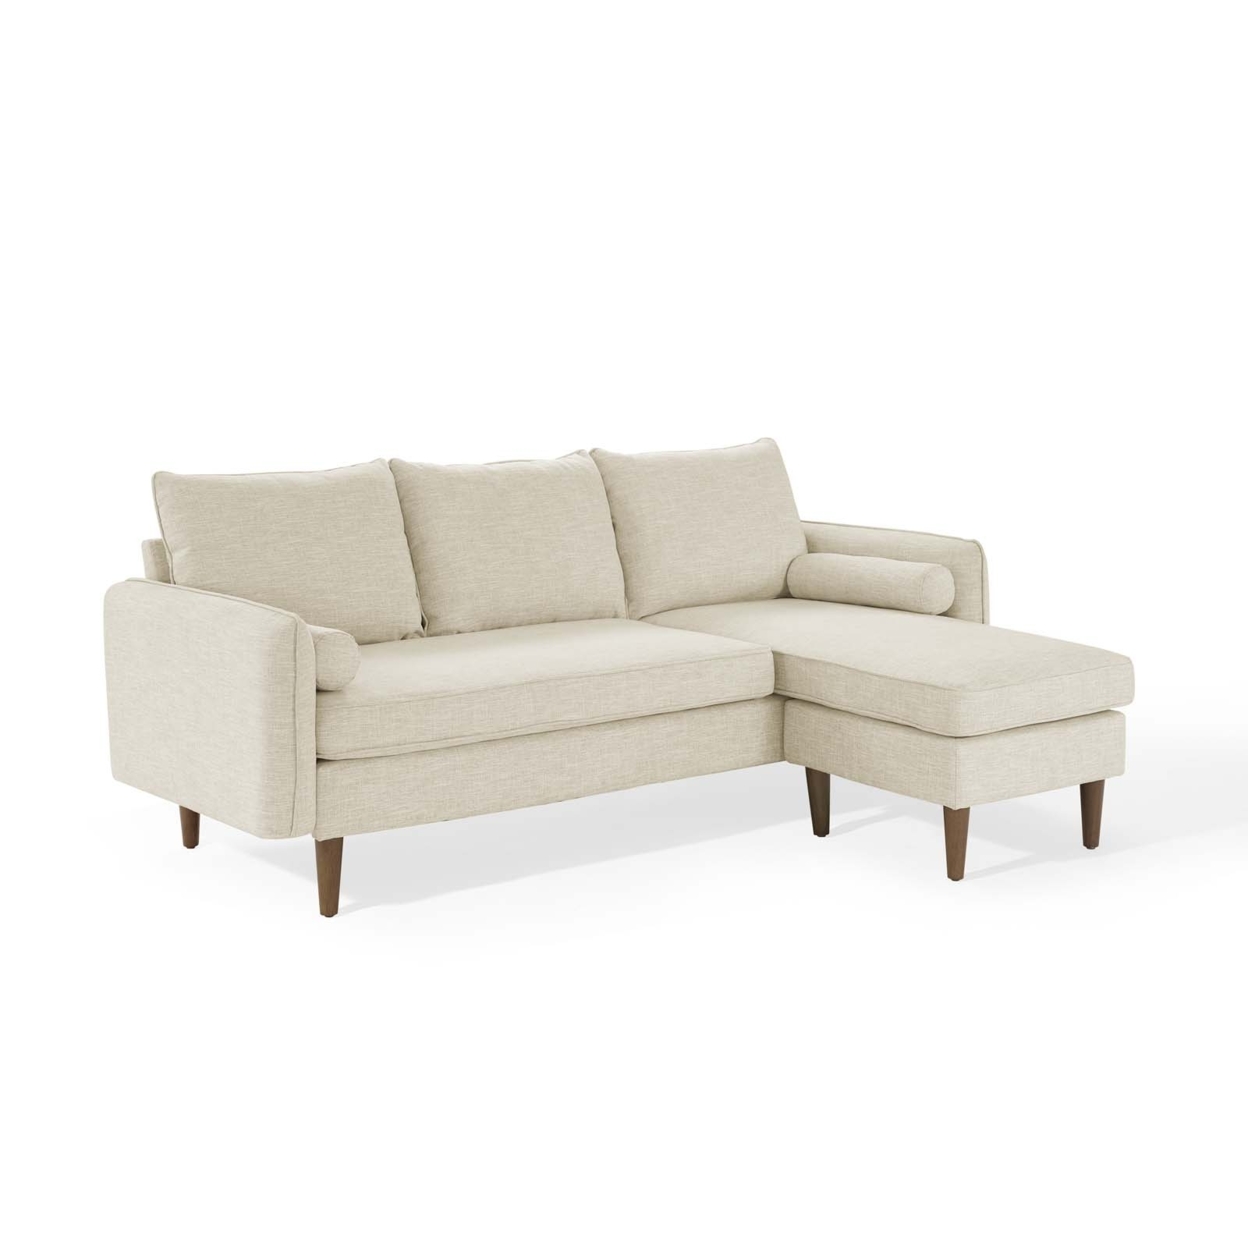 Revive Upholstered Right Or Left Sectional Sofa, Beige